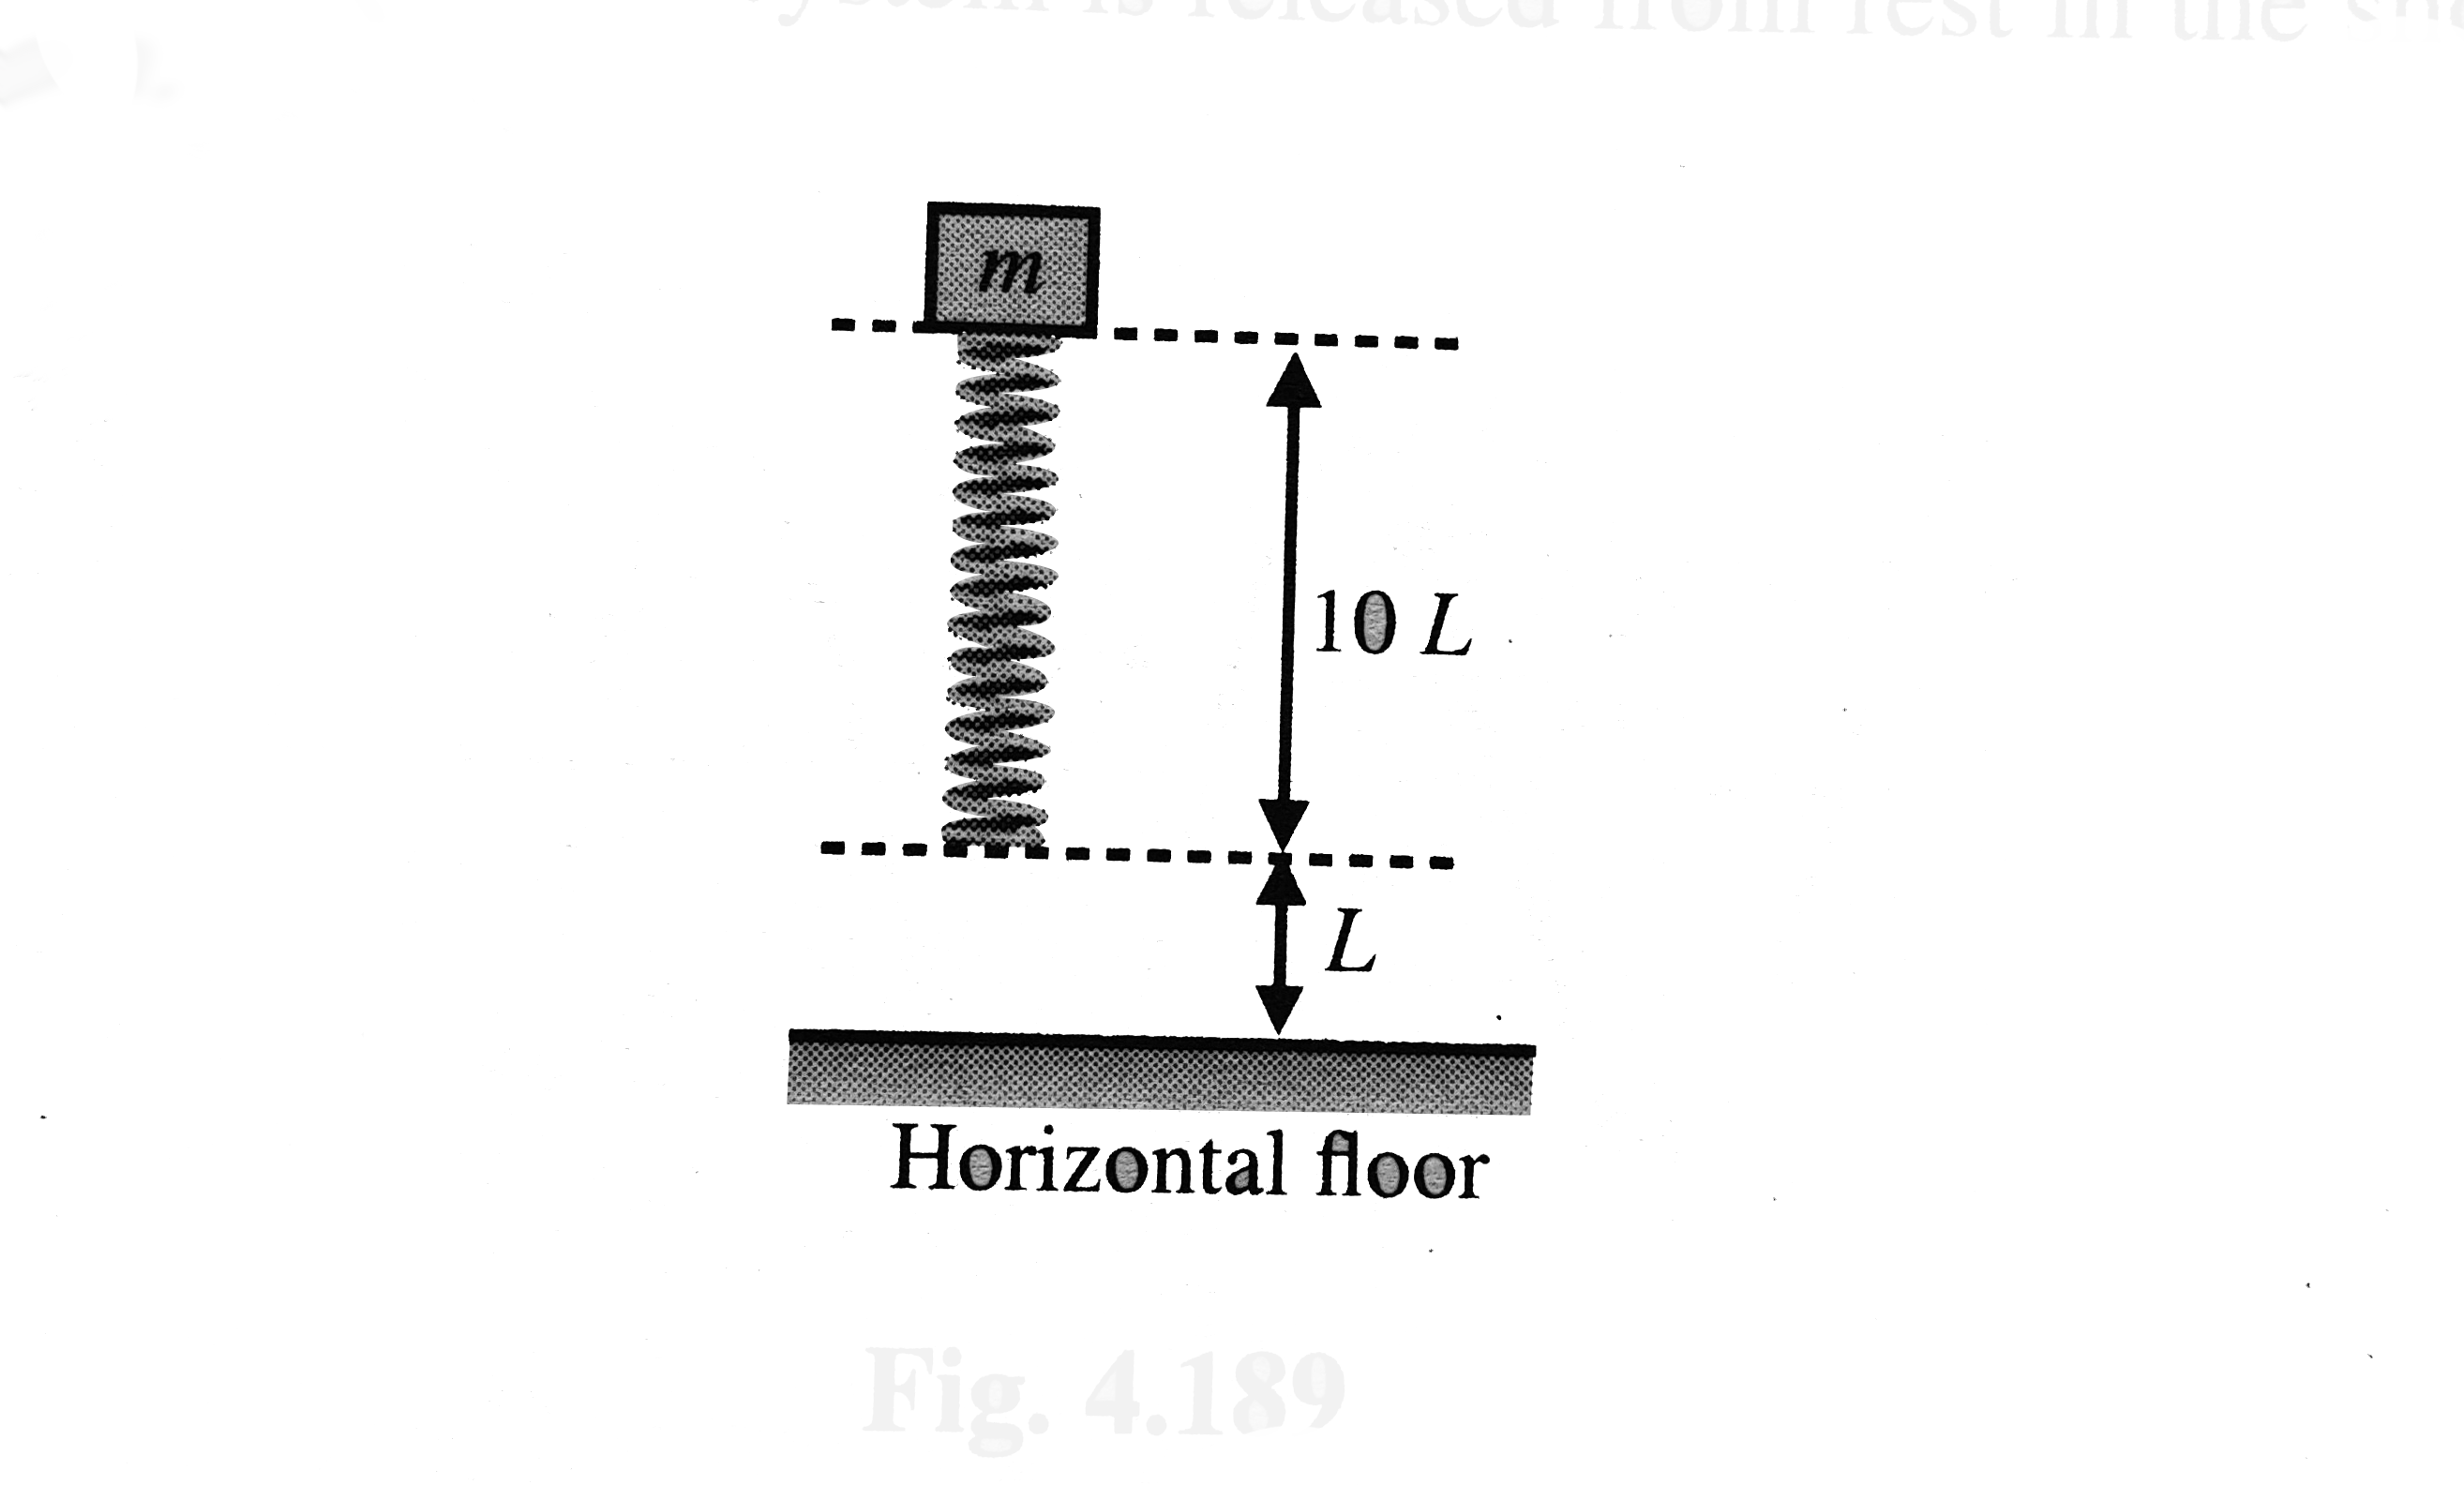 A small block of mass m is fixed at upper end of a massive vertical spring of spring constant k=(2mg)/(L) and natural length 10L The lower end of spring is free and is at a height L from fixed horizontal floor as shown. The spring is initially unstressed and the spring block system is released from rest in the shown position.   Q. As the block is coming down, the maximum speed attained by the block is